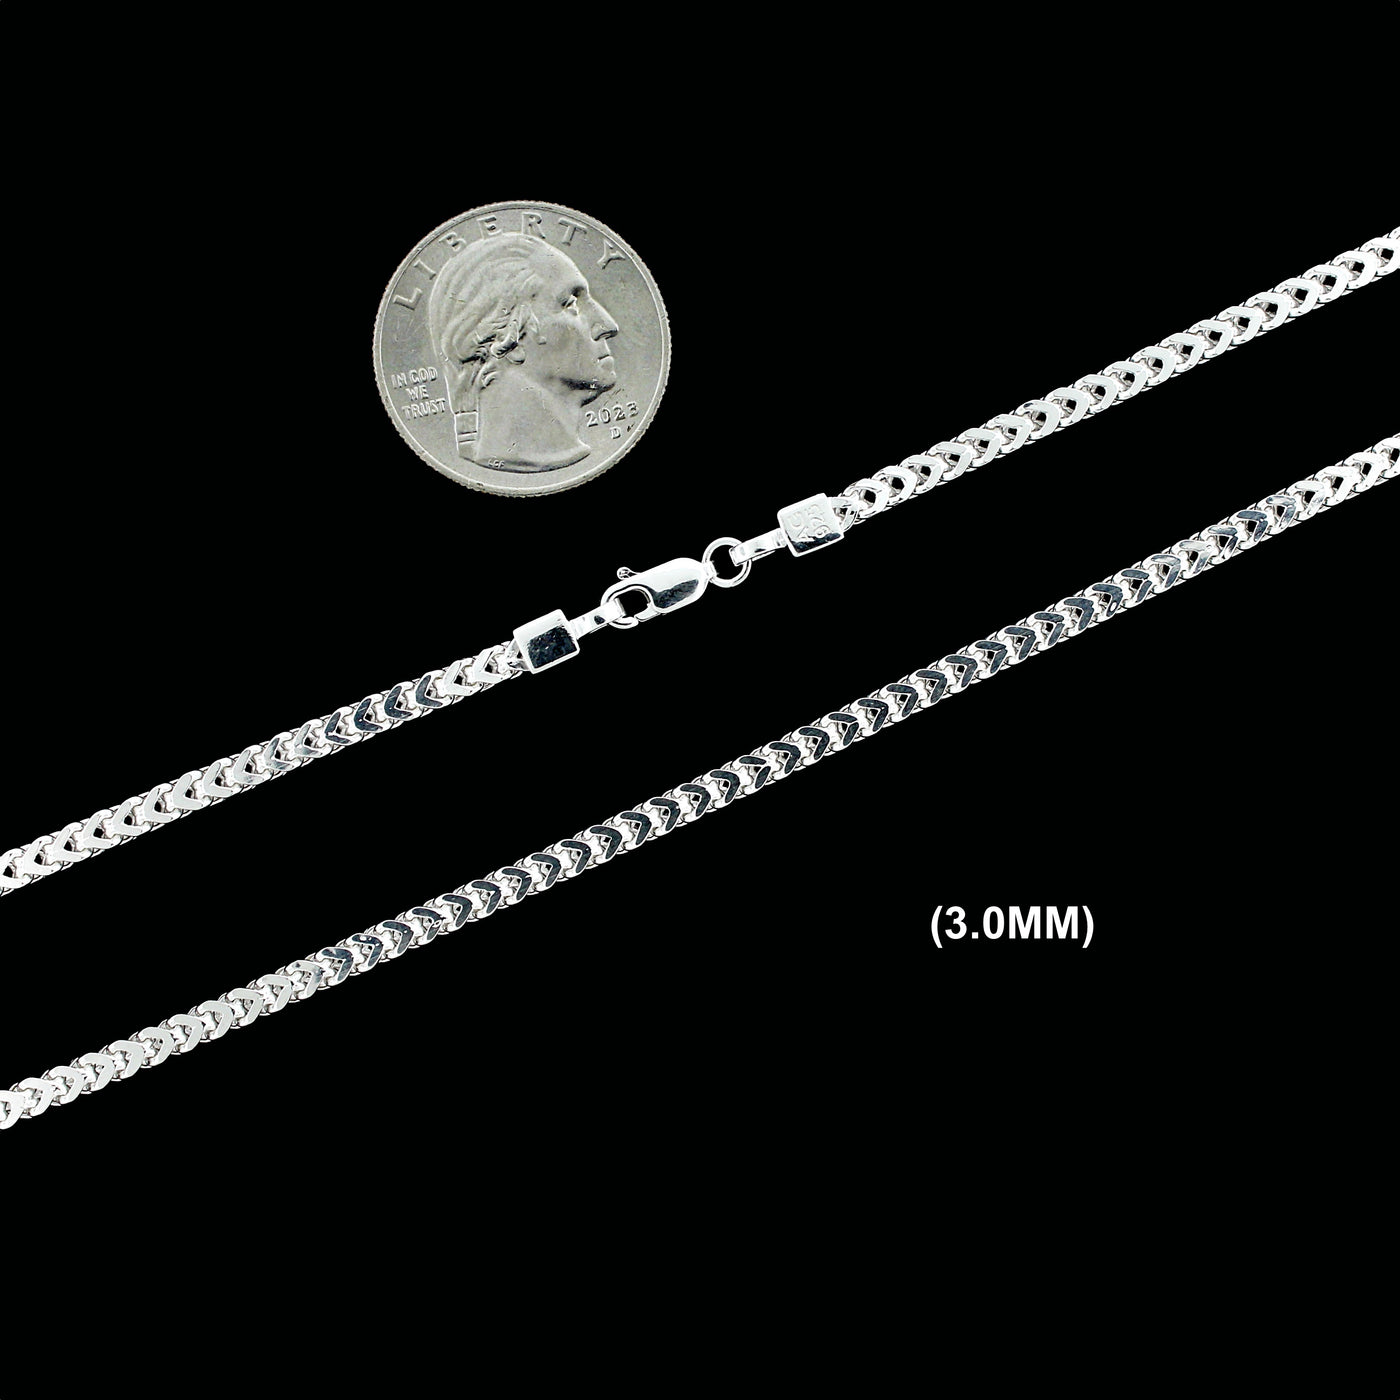 Real 3MM Solid 925 Sterling Silver Italian FRANCO LINK CHAIN Necklace UNISEX